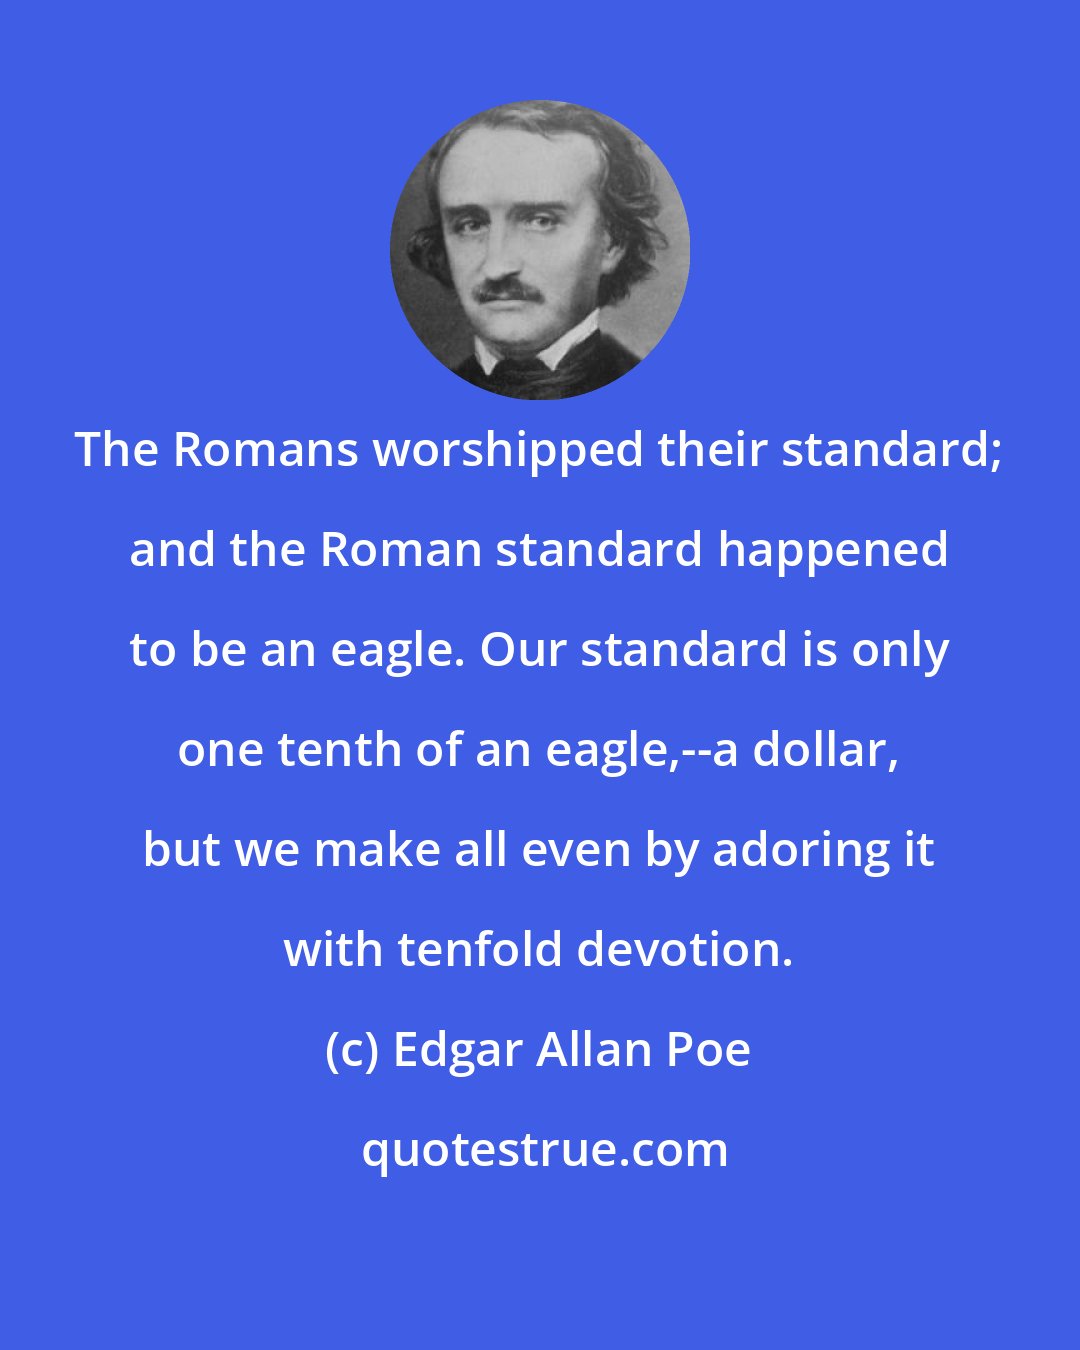 Edgar Allan Poe: The Romans worshipped their standard; and the Roman standard happened to be an eagle. Our standard is only one tenth of an eagle,--a dollar, but we make all even by adoring it with tenfold devotion.